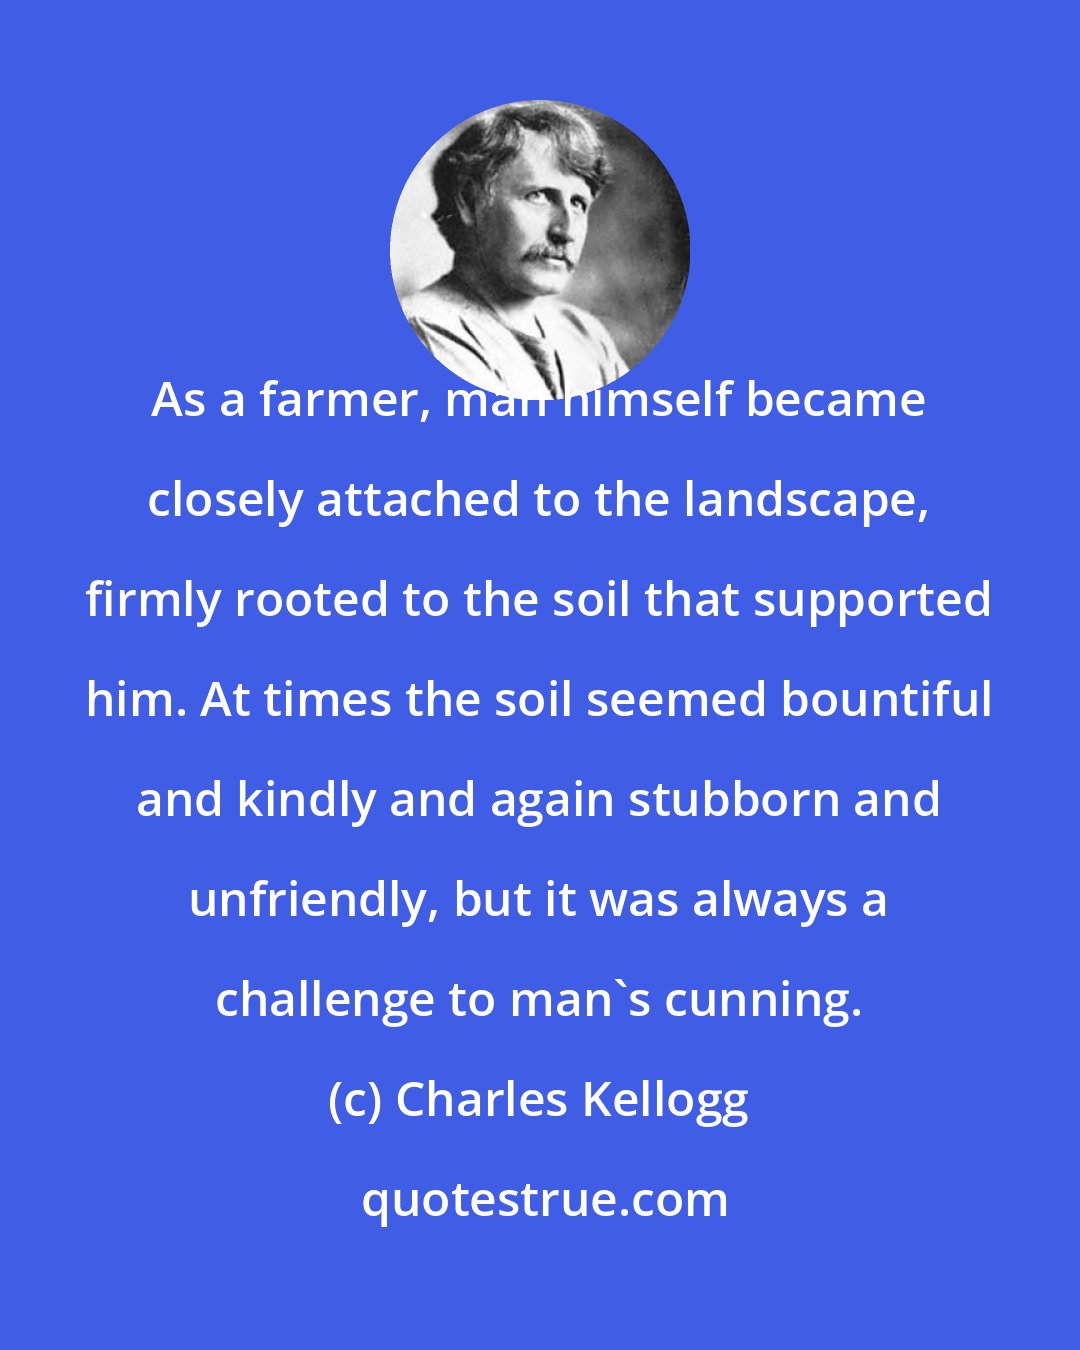 Charles Kellogg: As a farmer, man himself became closely attached to the landscape, firmly rooted to the soil that supported him. At times the soil seemed bountiful and kindly and again stubborn and unfriendly, but it was always a challenge to man's cunning.